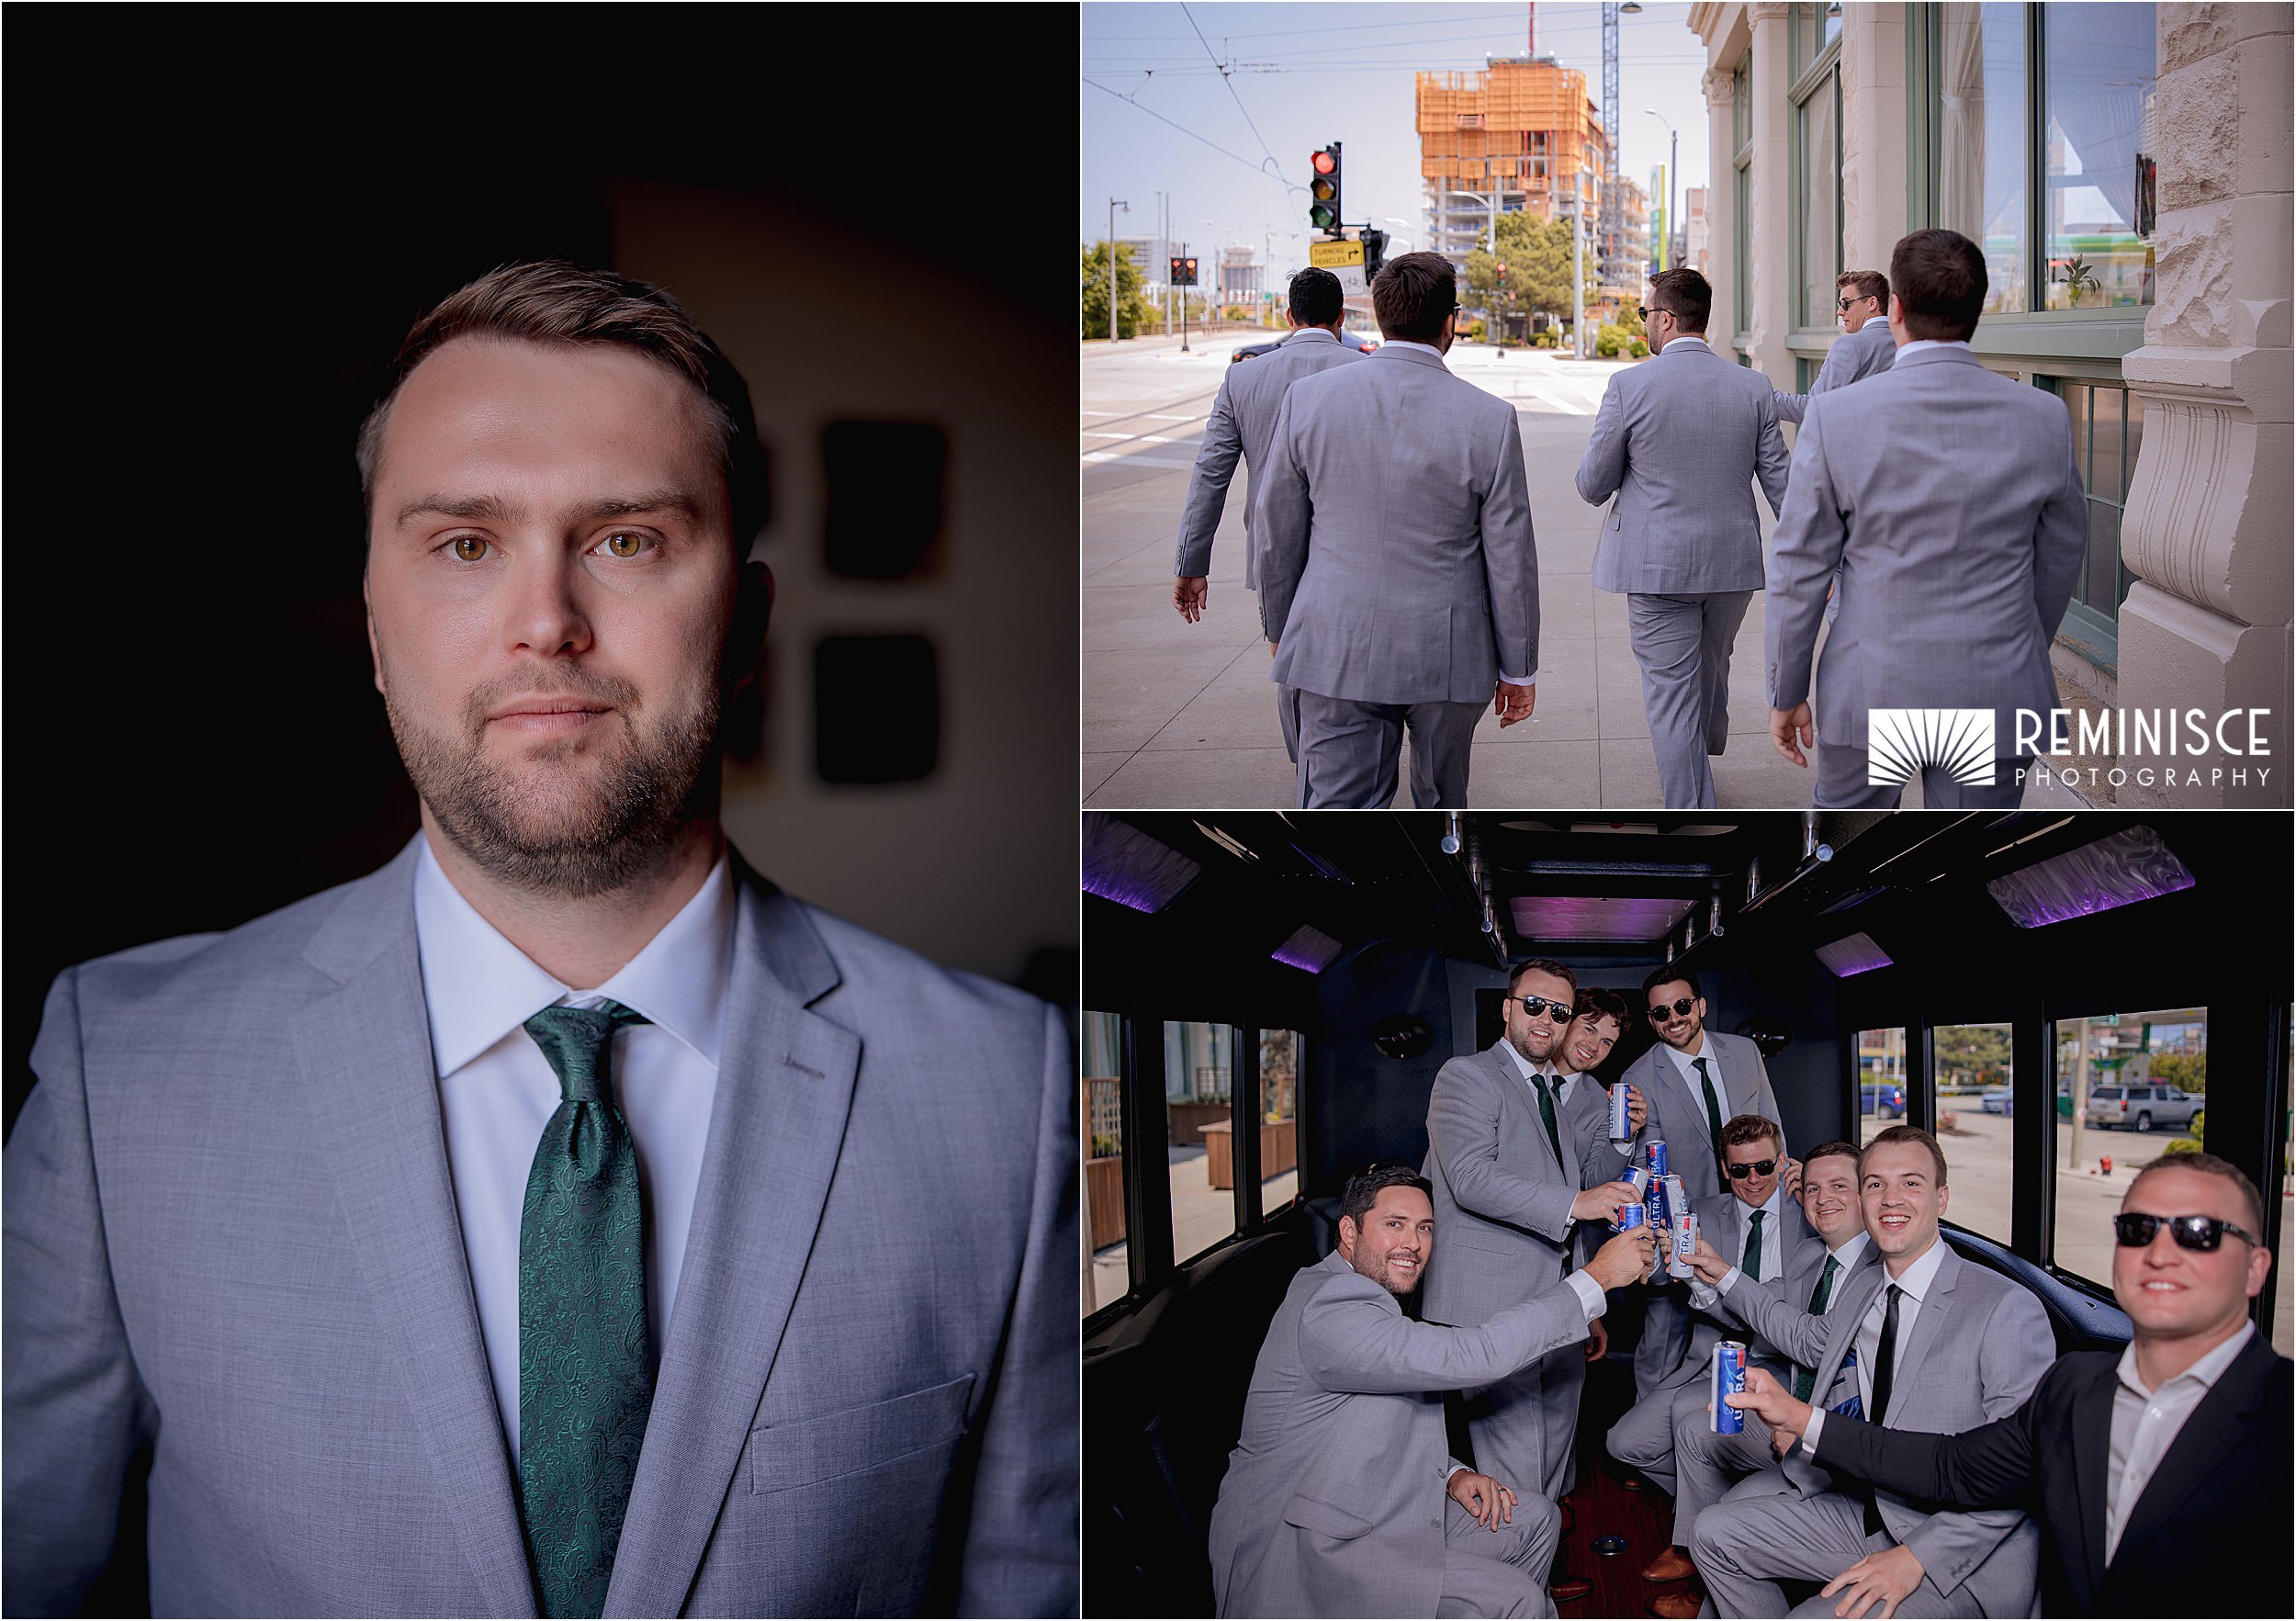 Best Milwaukee wedding photographer servicing Milwaukee, Madison and Chicago in Wisconsin and Illinois. Artistic, fun, and candid wedding photography featuring engagements, elopements, bride groom portraits, LGBT wedding ceremony and wedding reception photographs.